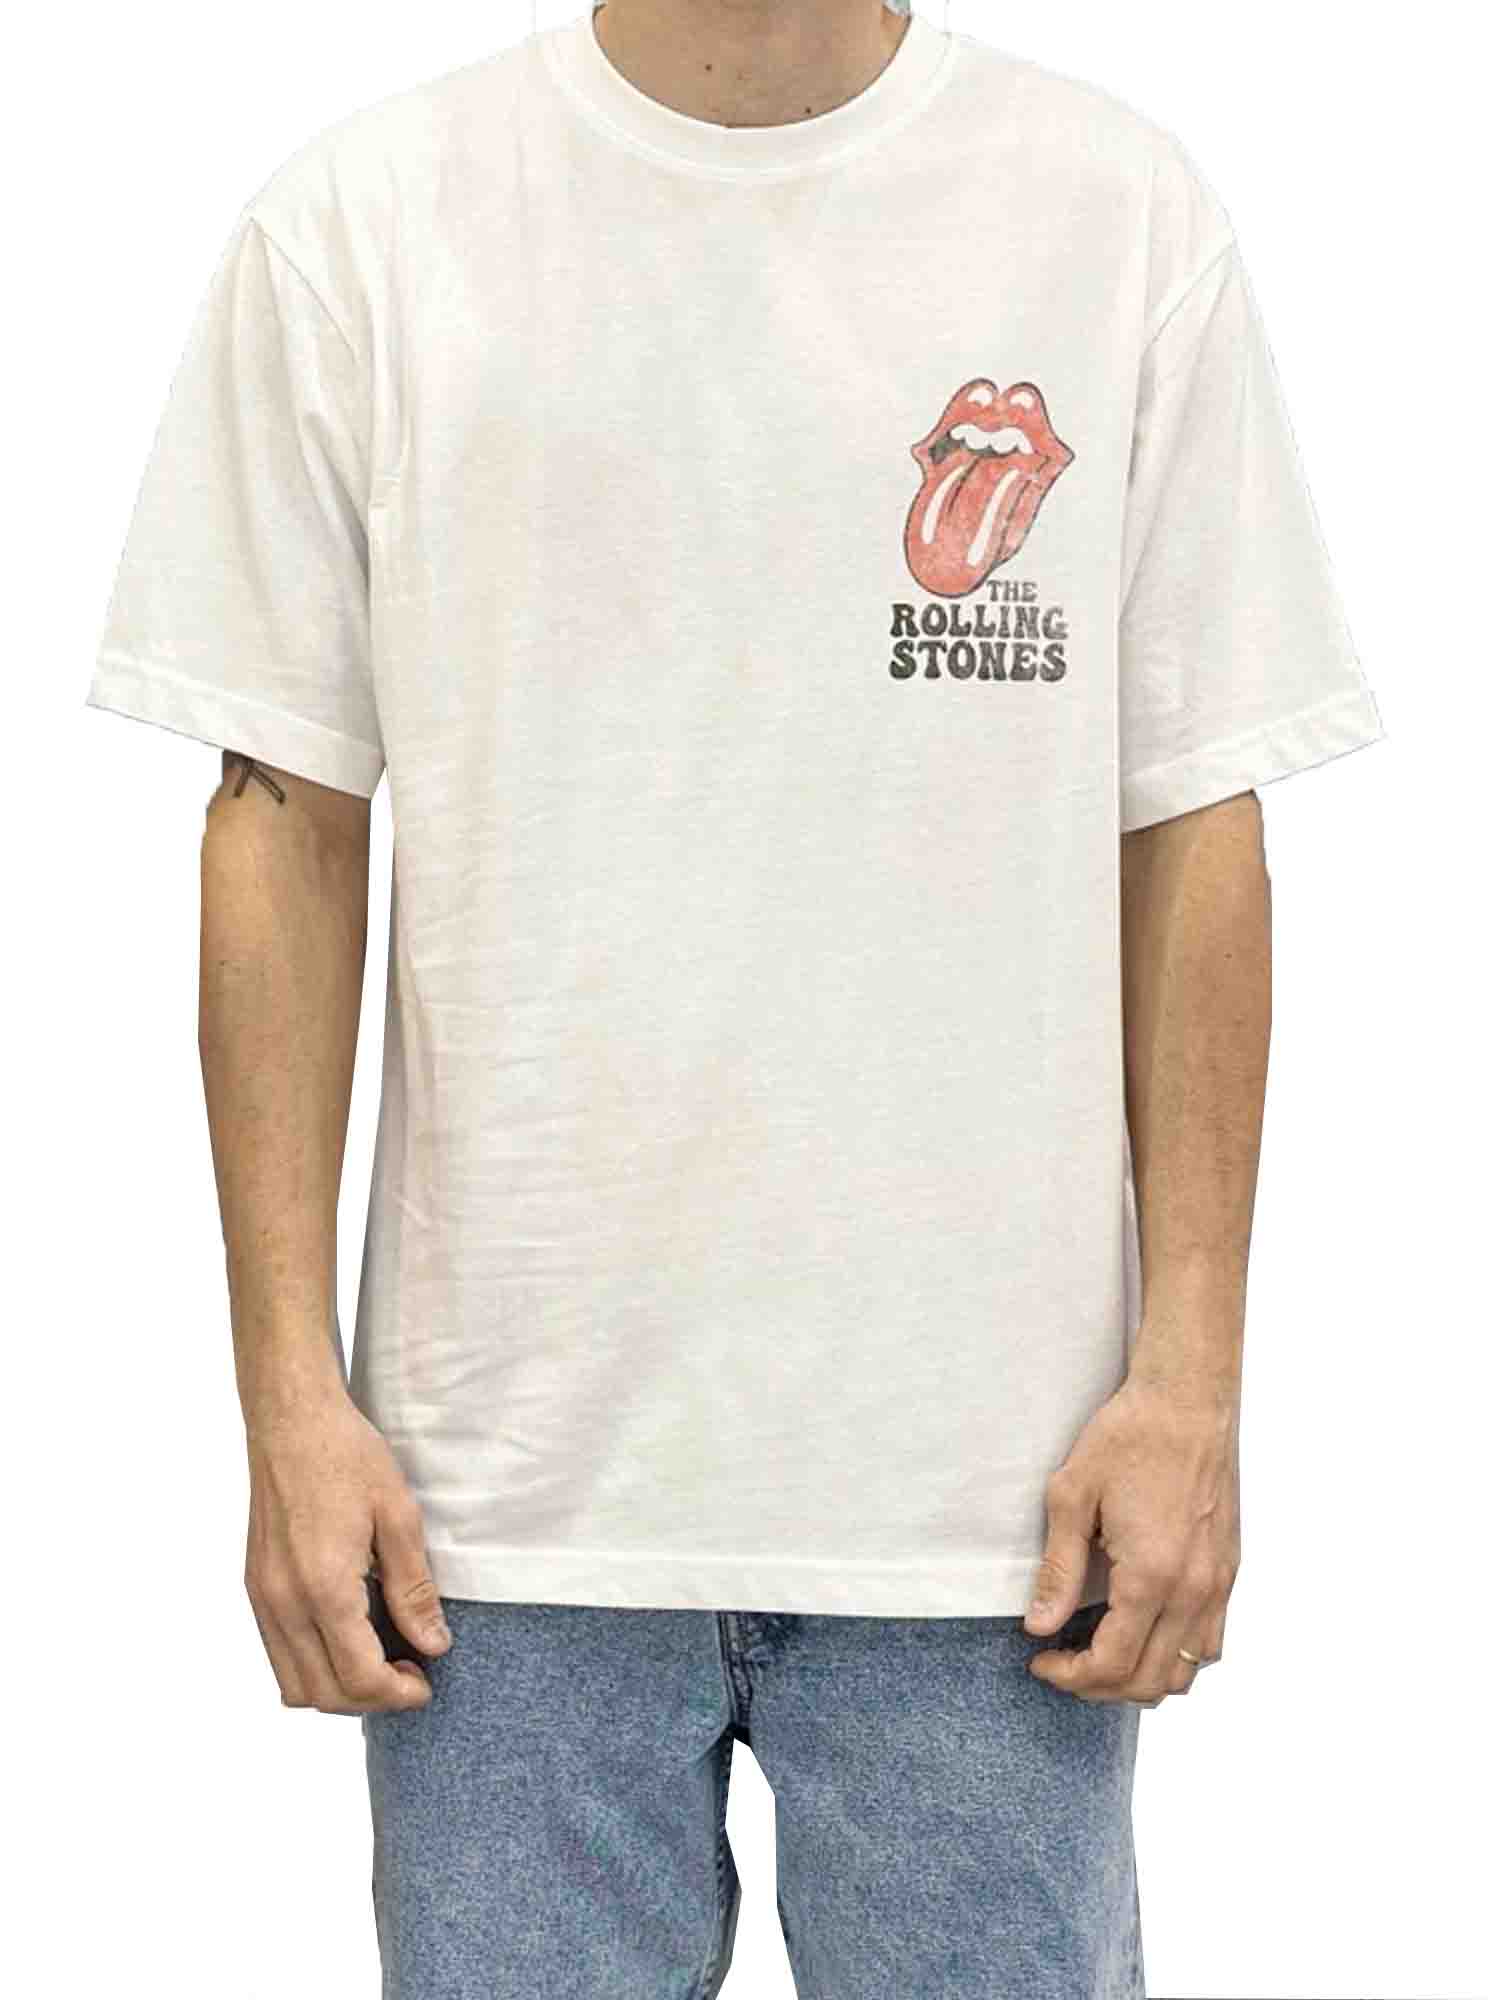 ONLY&SONS T-SHIRT THE ROLLING STONES BIANCO